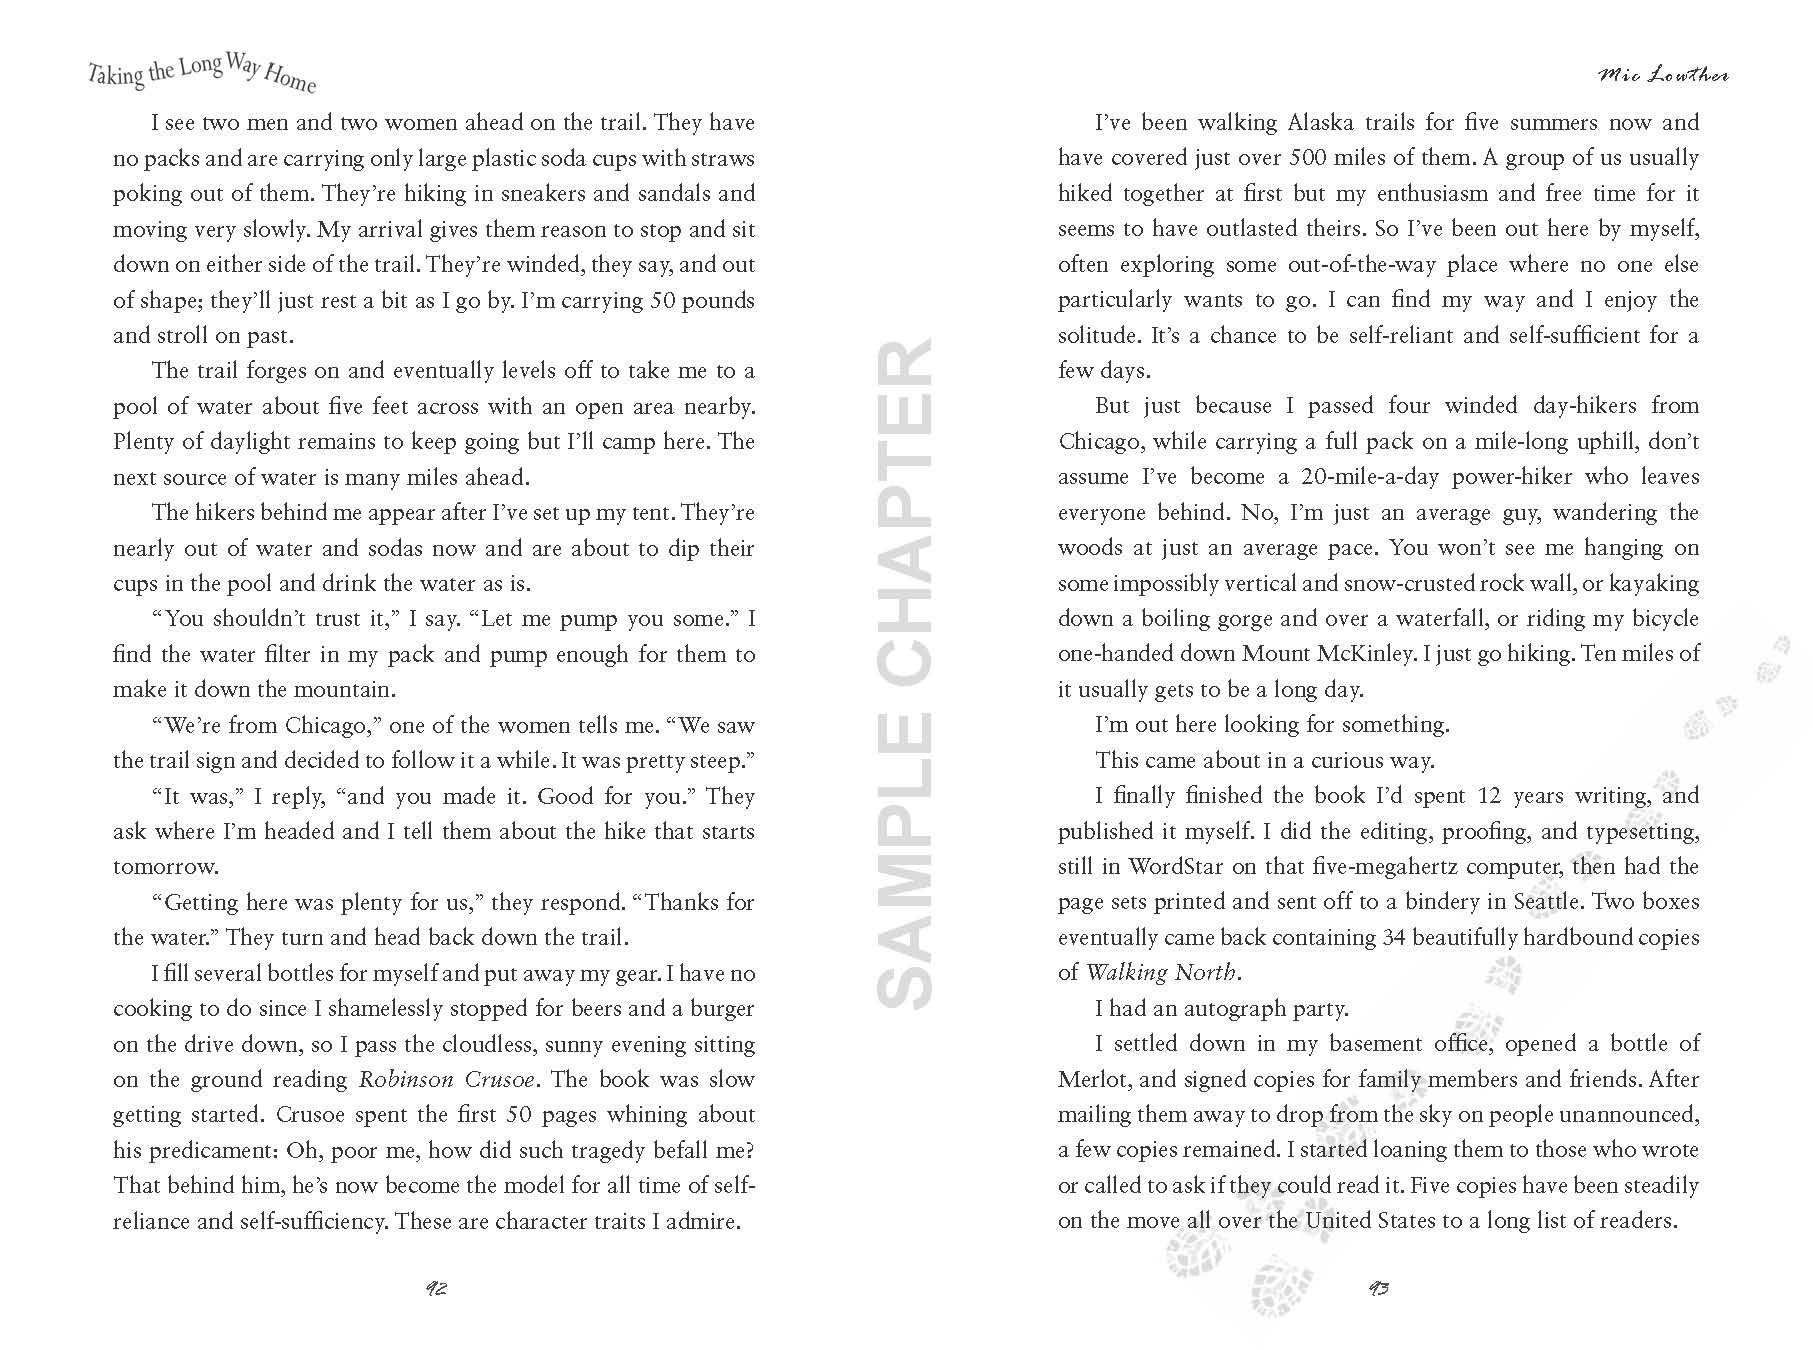 Taking The Long Way Home sample chapter pg 3 & 4